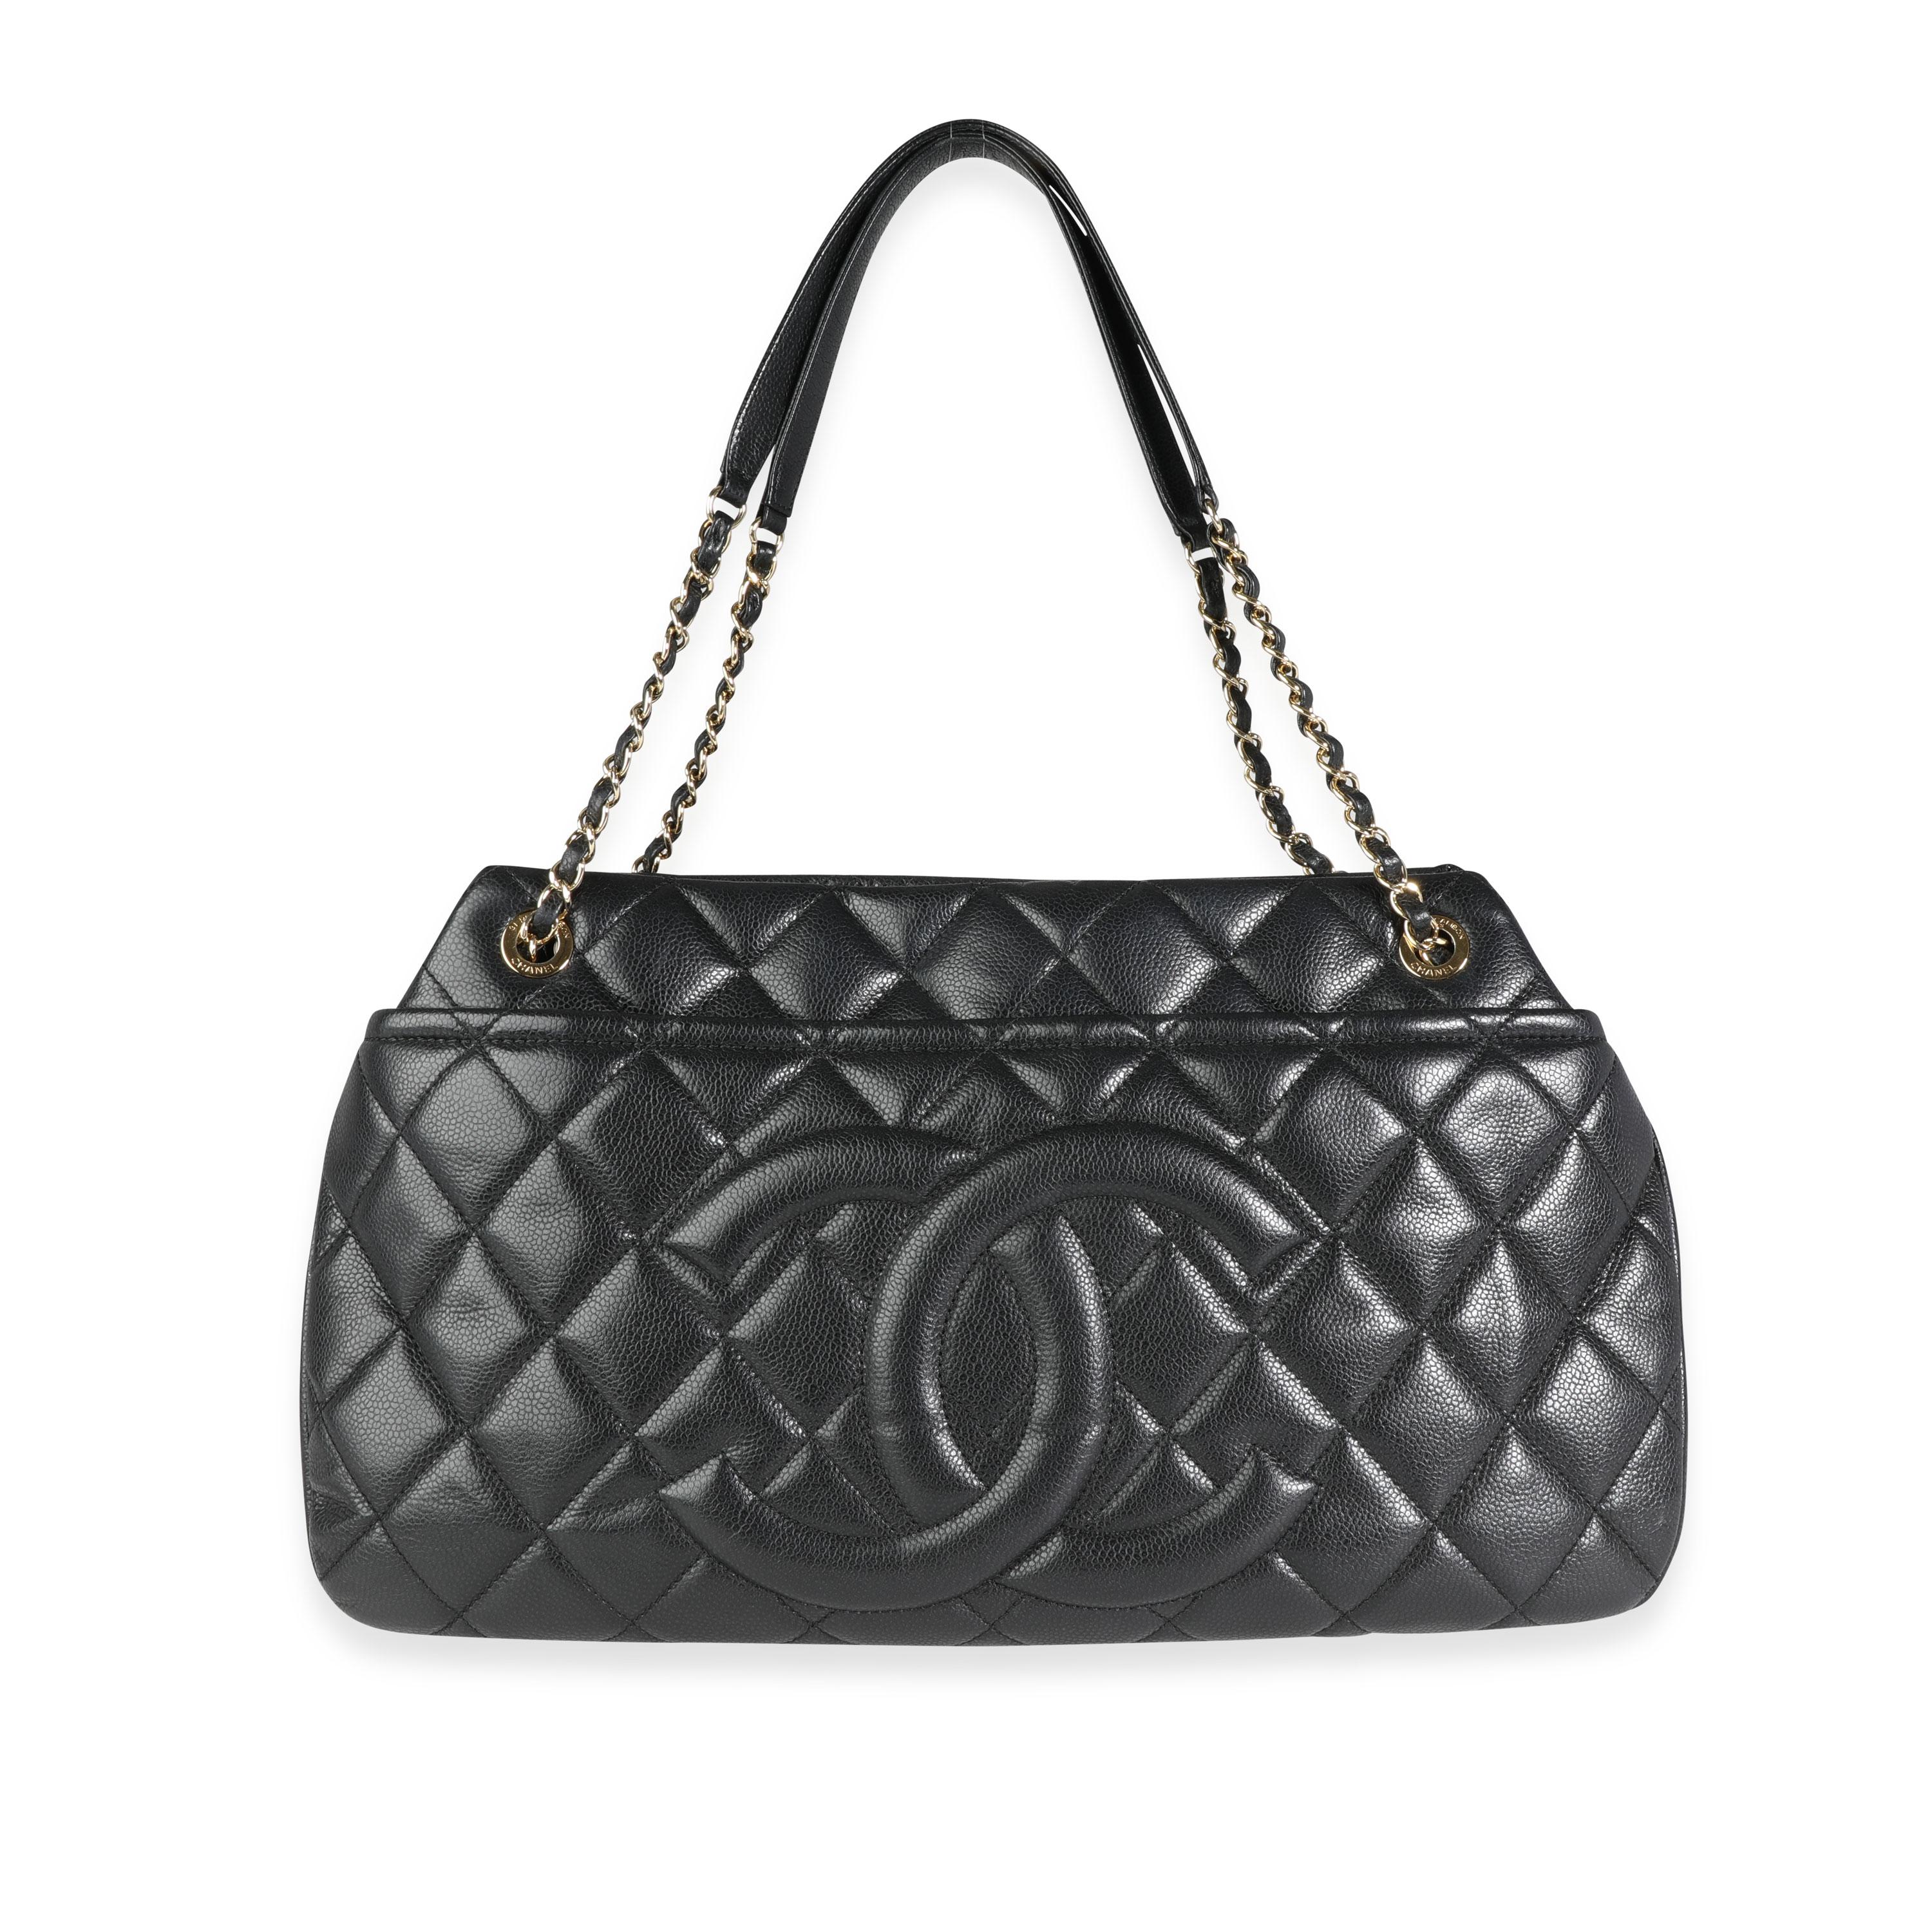 Listing Title: Chanel Black Quilted Caviar Timeless Soft Shopping Tote
SKU: 114848
MSRP: 3300.00
Condition: Pre-owned (3000)
Handbag Condition: Very Good
Condition Comments: Very Good Condition. Light scuffs to leather. Scratching and tarnishing to